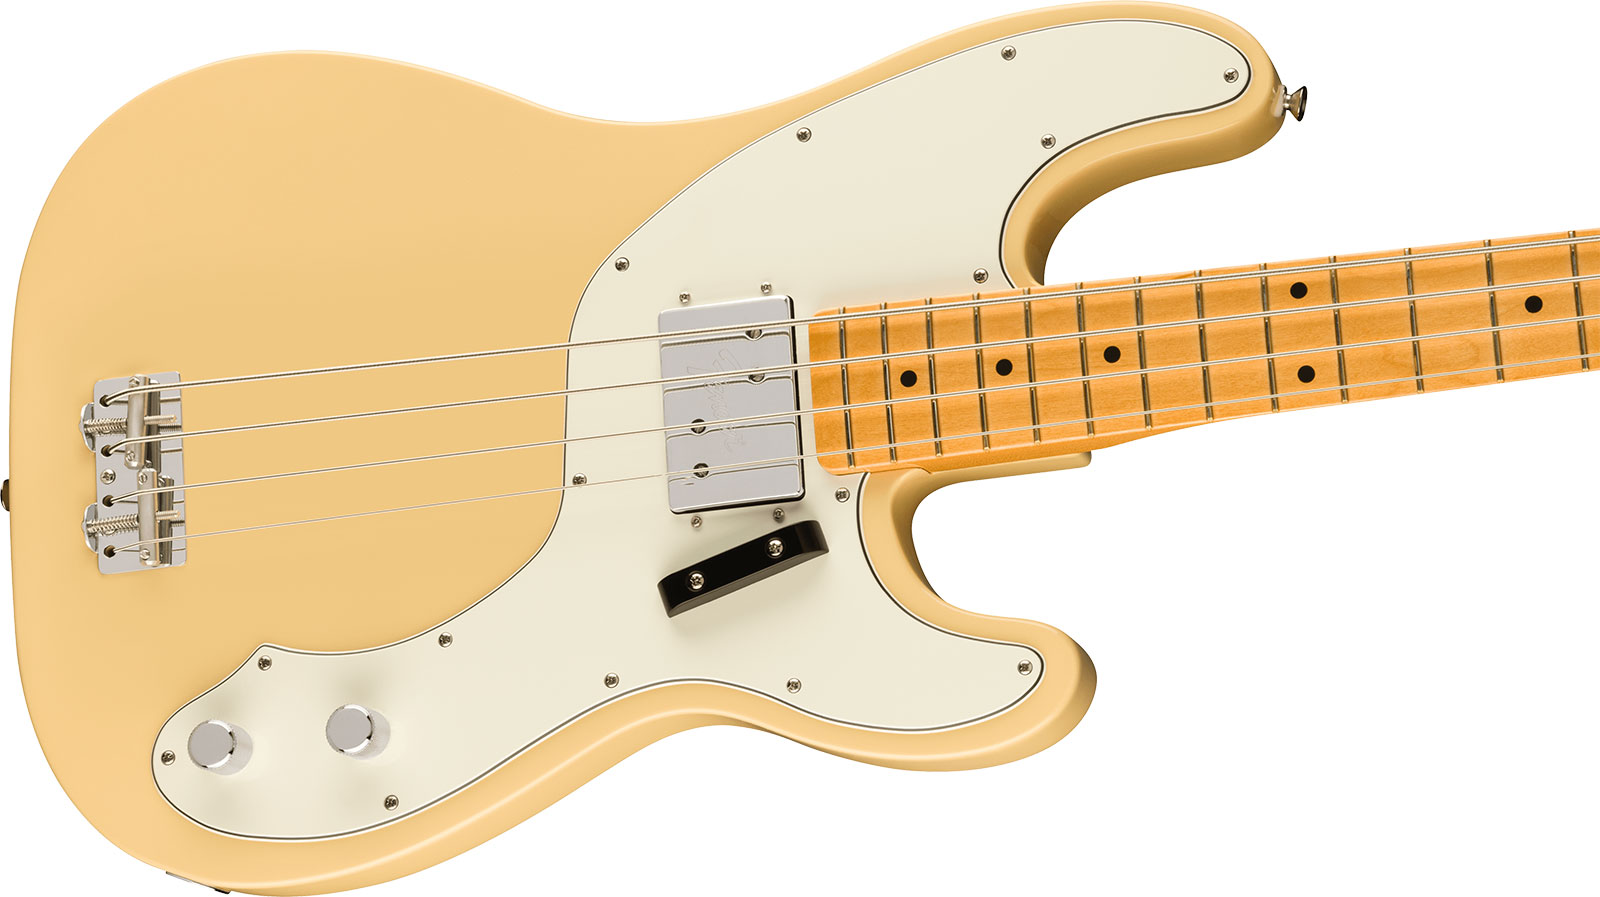 Fender Tele Bass 70s Vintera 2 Mex Mn - Vintage White - Solid body electric bass - Variation 2